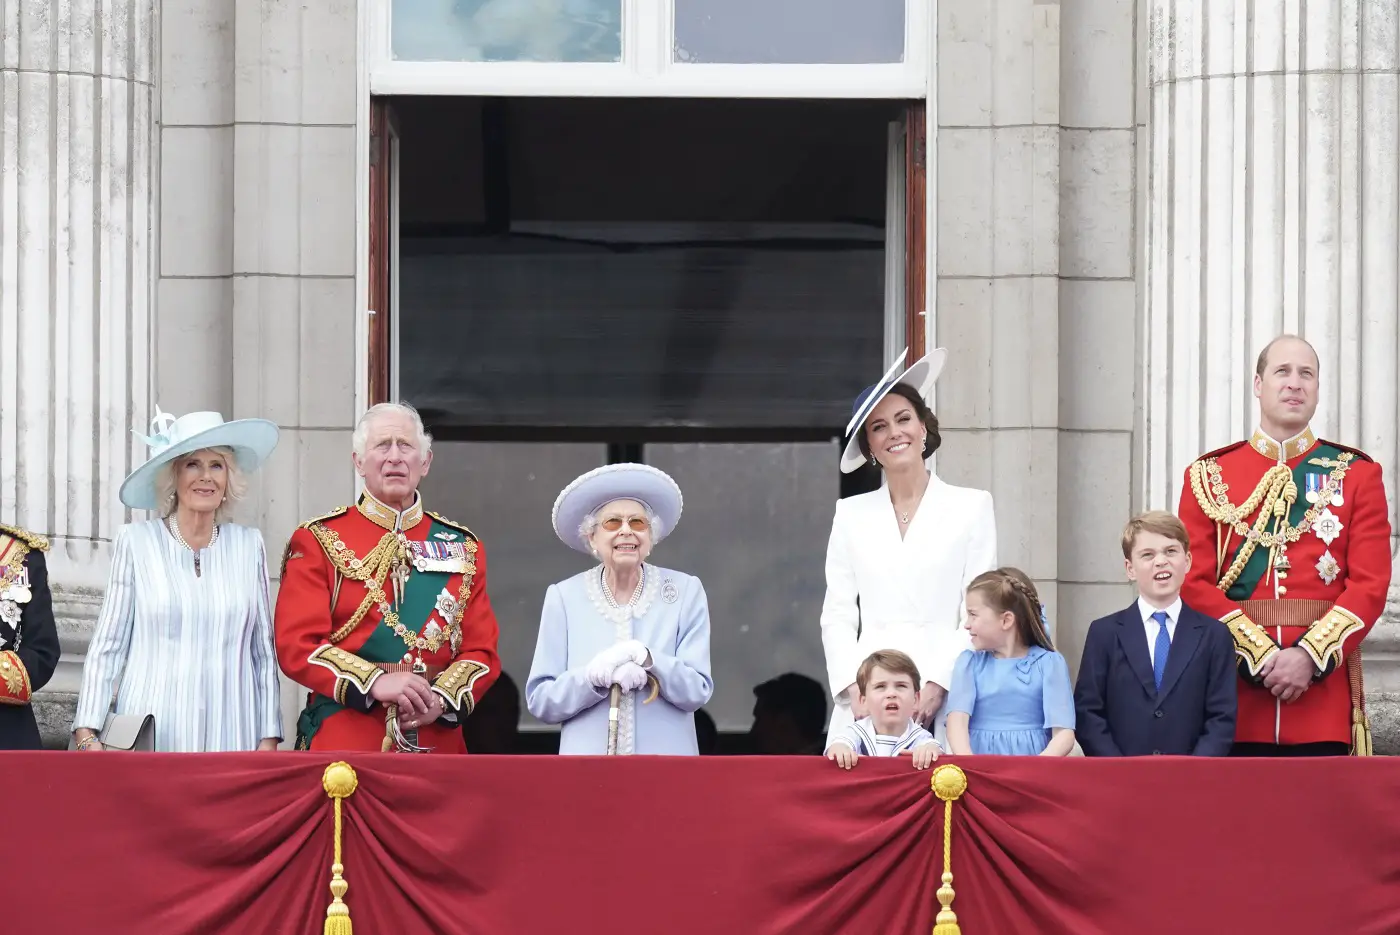 British Royal Family at the 2022 Trooping the Colour Parade